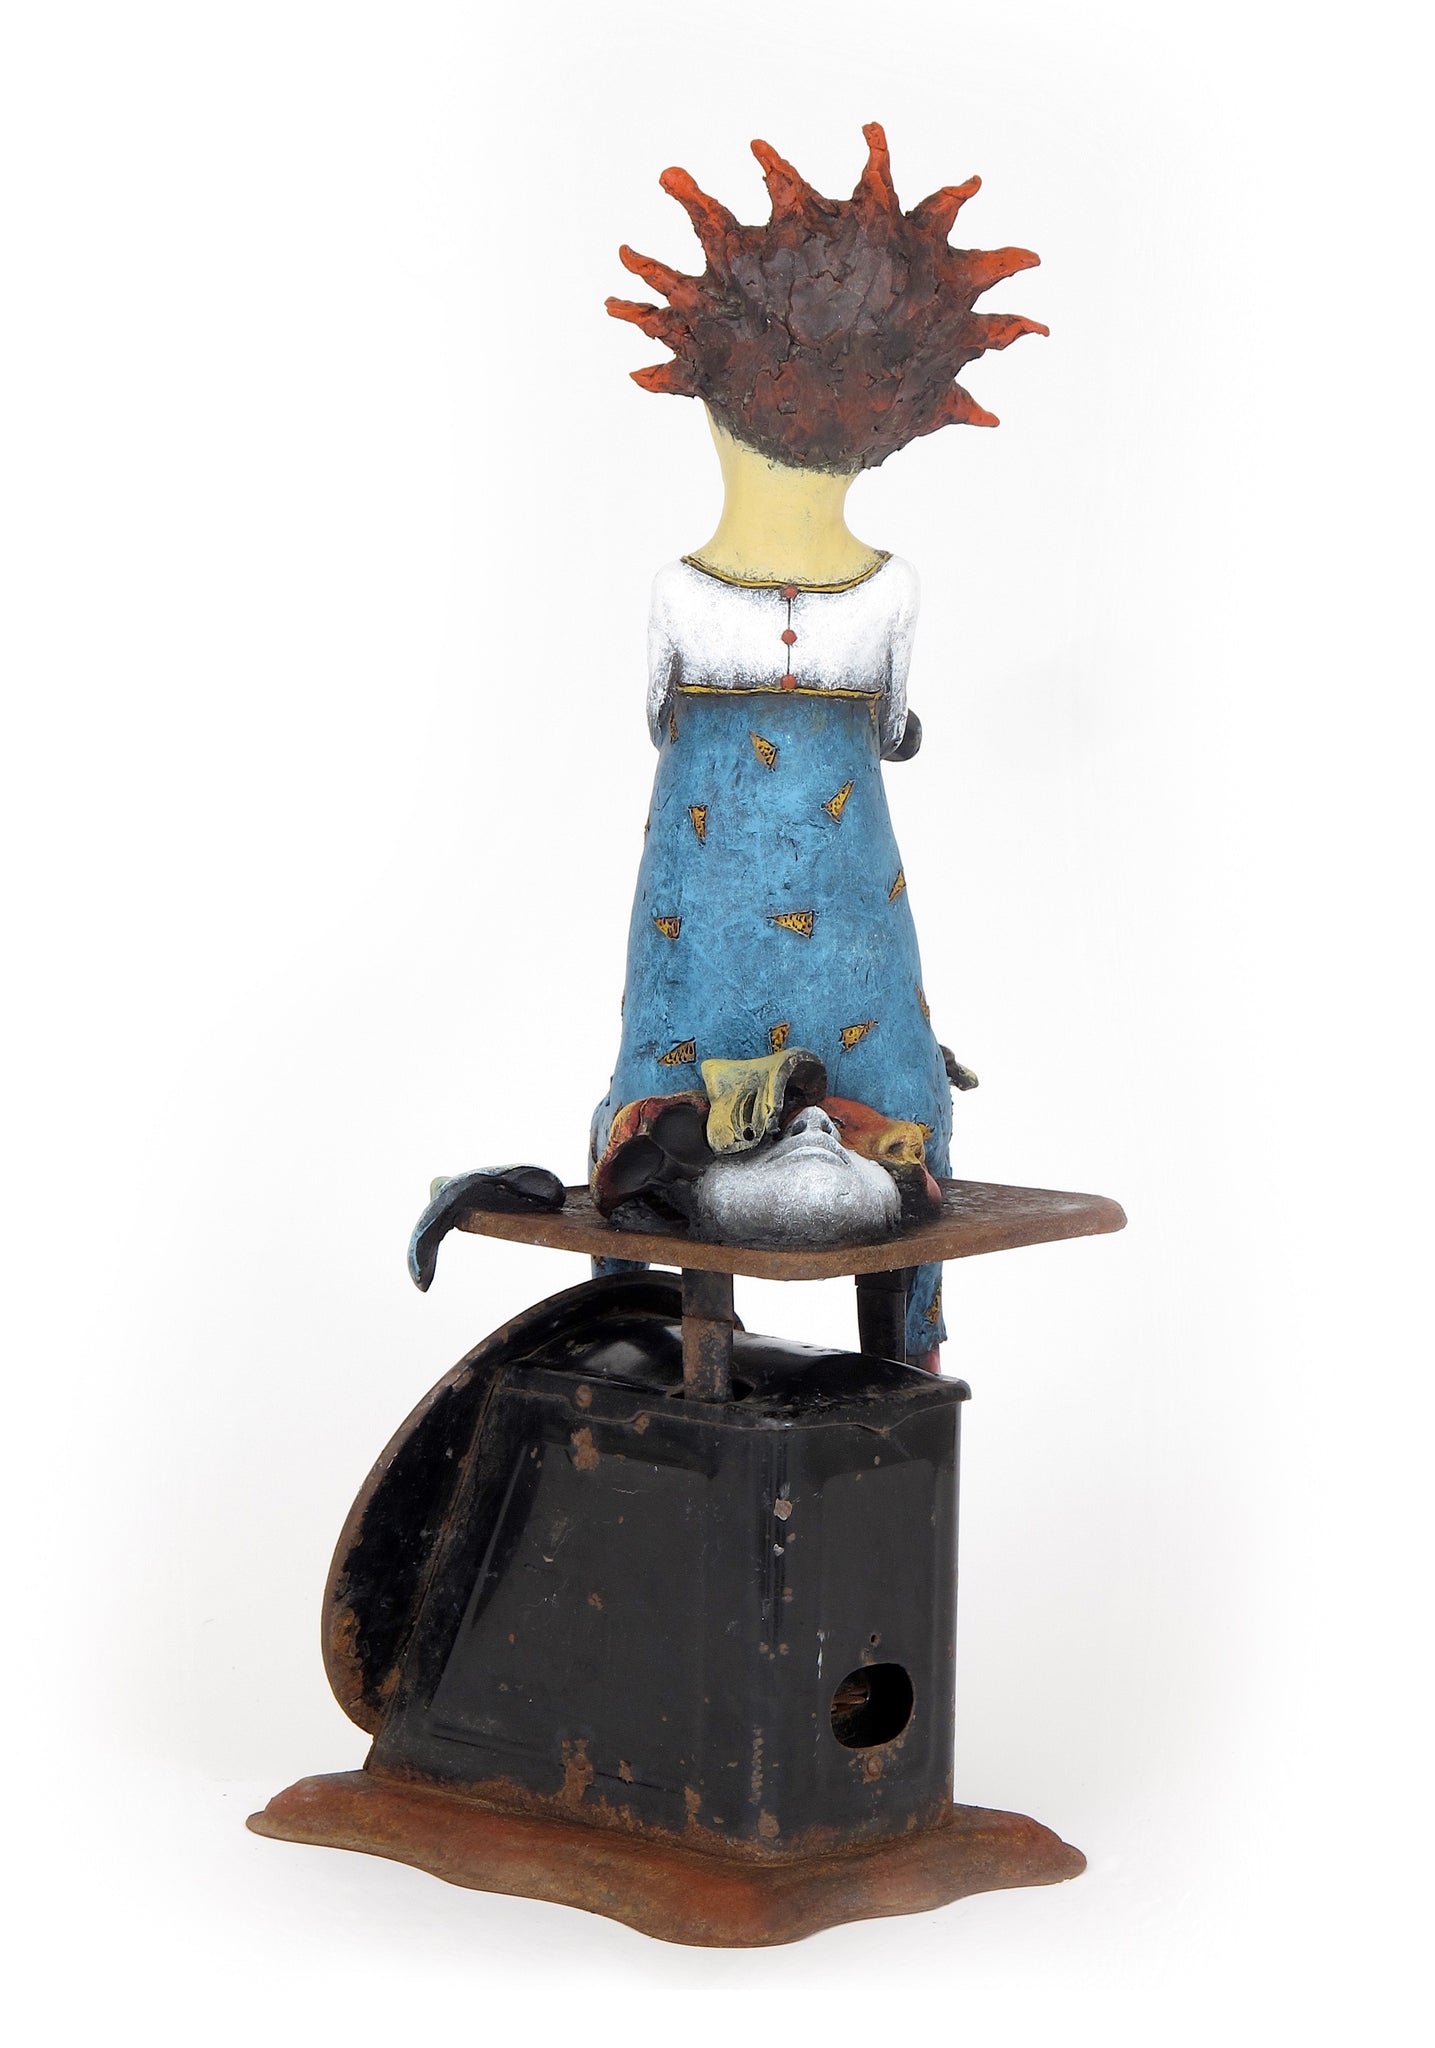 SOLD   "Weighing the Cost of Self-Deception" original ceramic sculpture by Jacquline Hurlbert